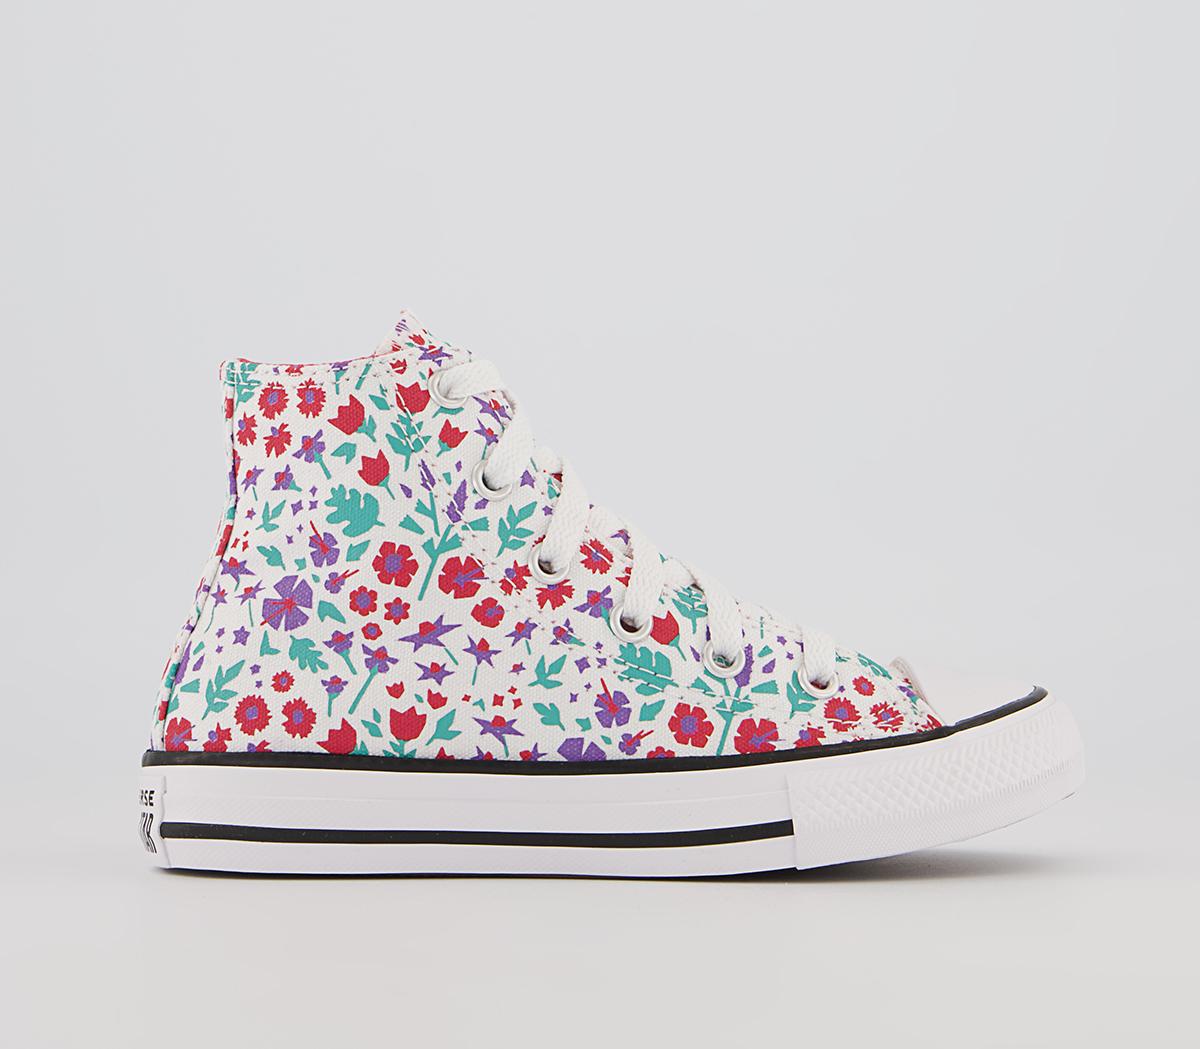 ConverseAll Star Hi Mid Sizes TrainersWhite Soft Red Pixel Purple Floral